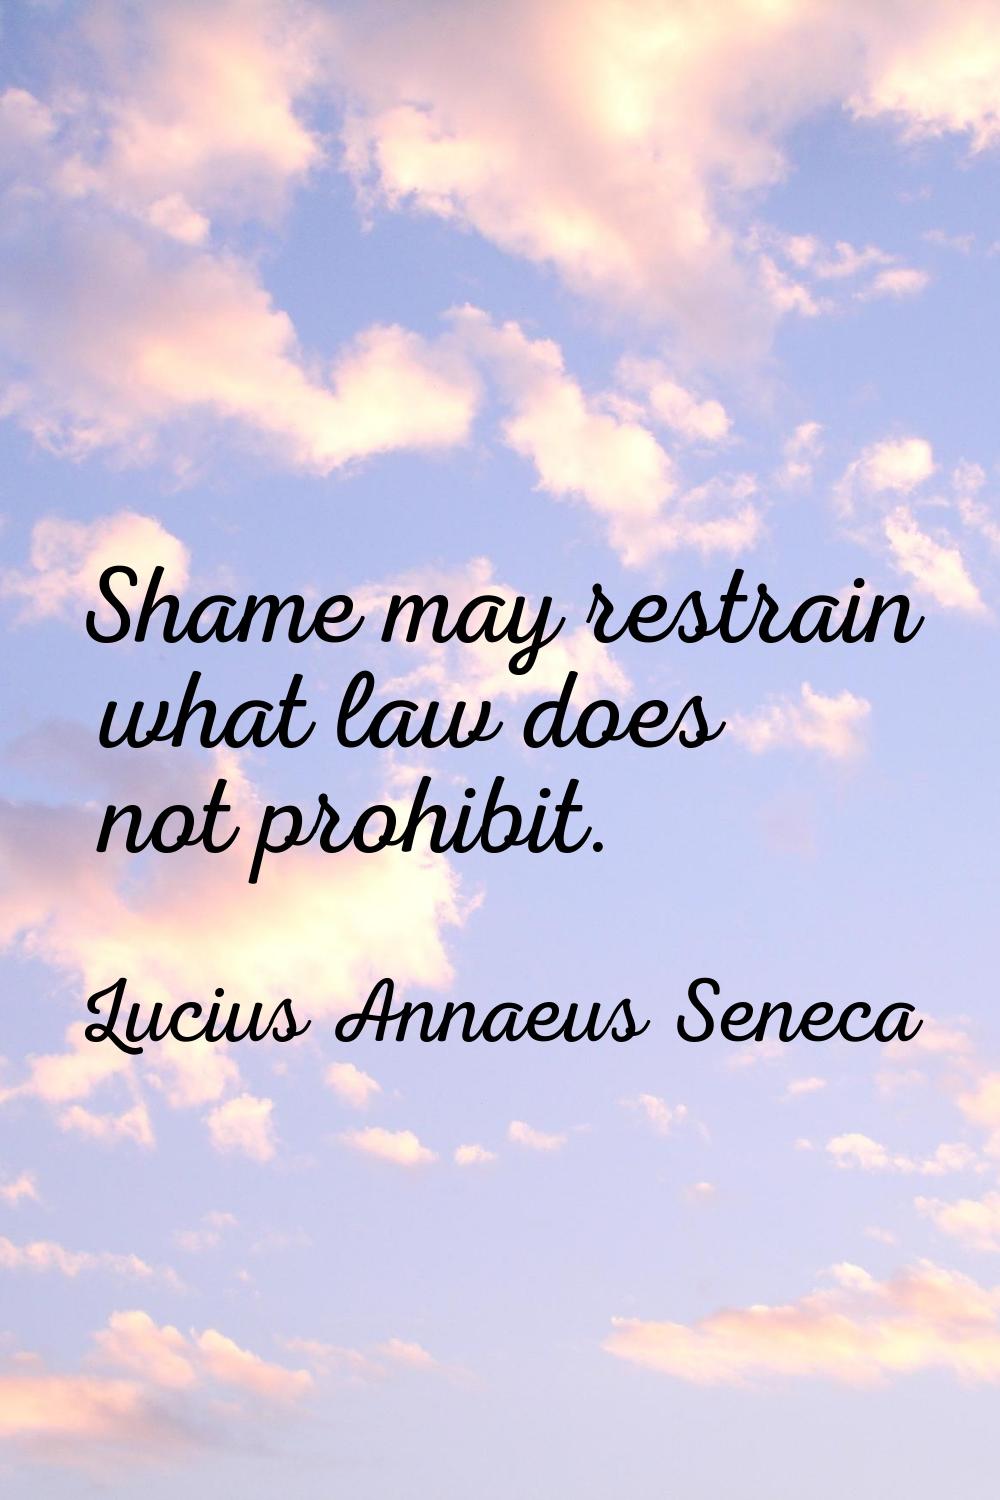 Shame may restrain what law does not prohibit.